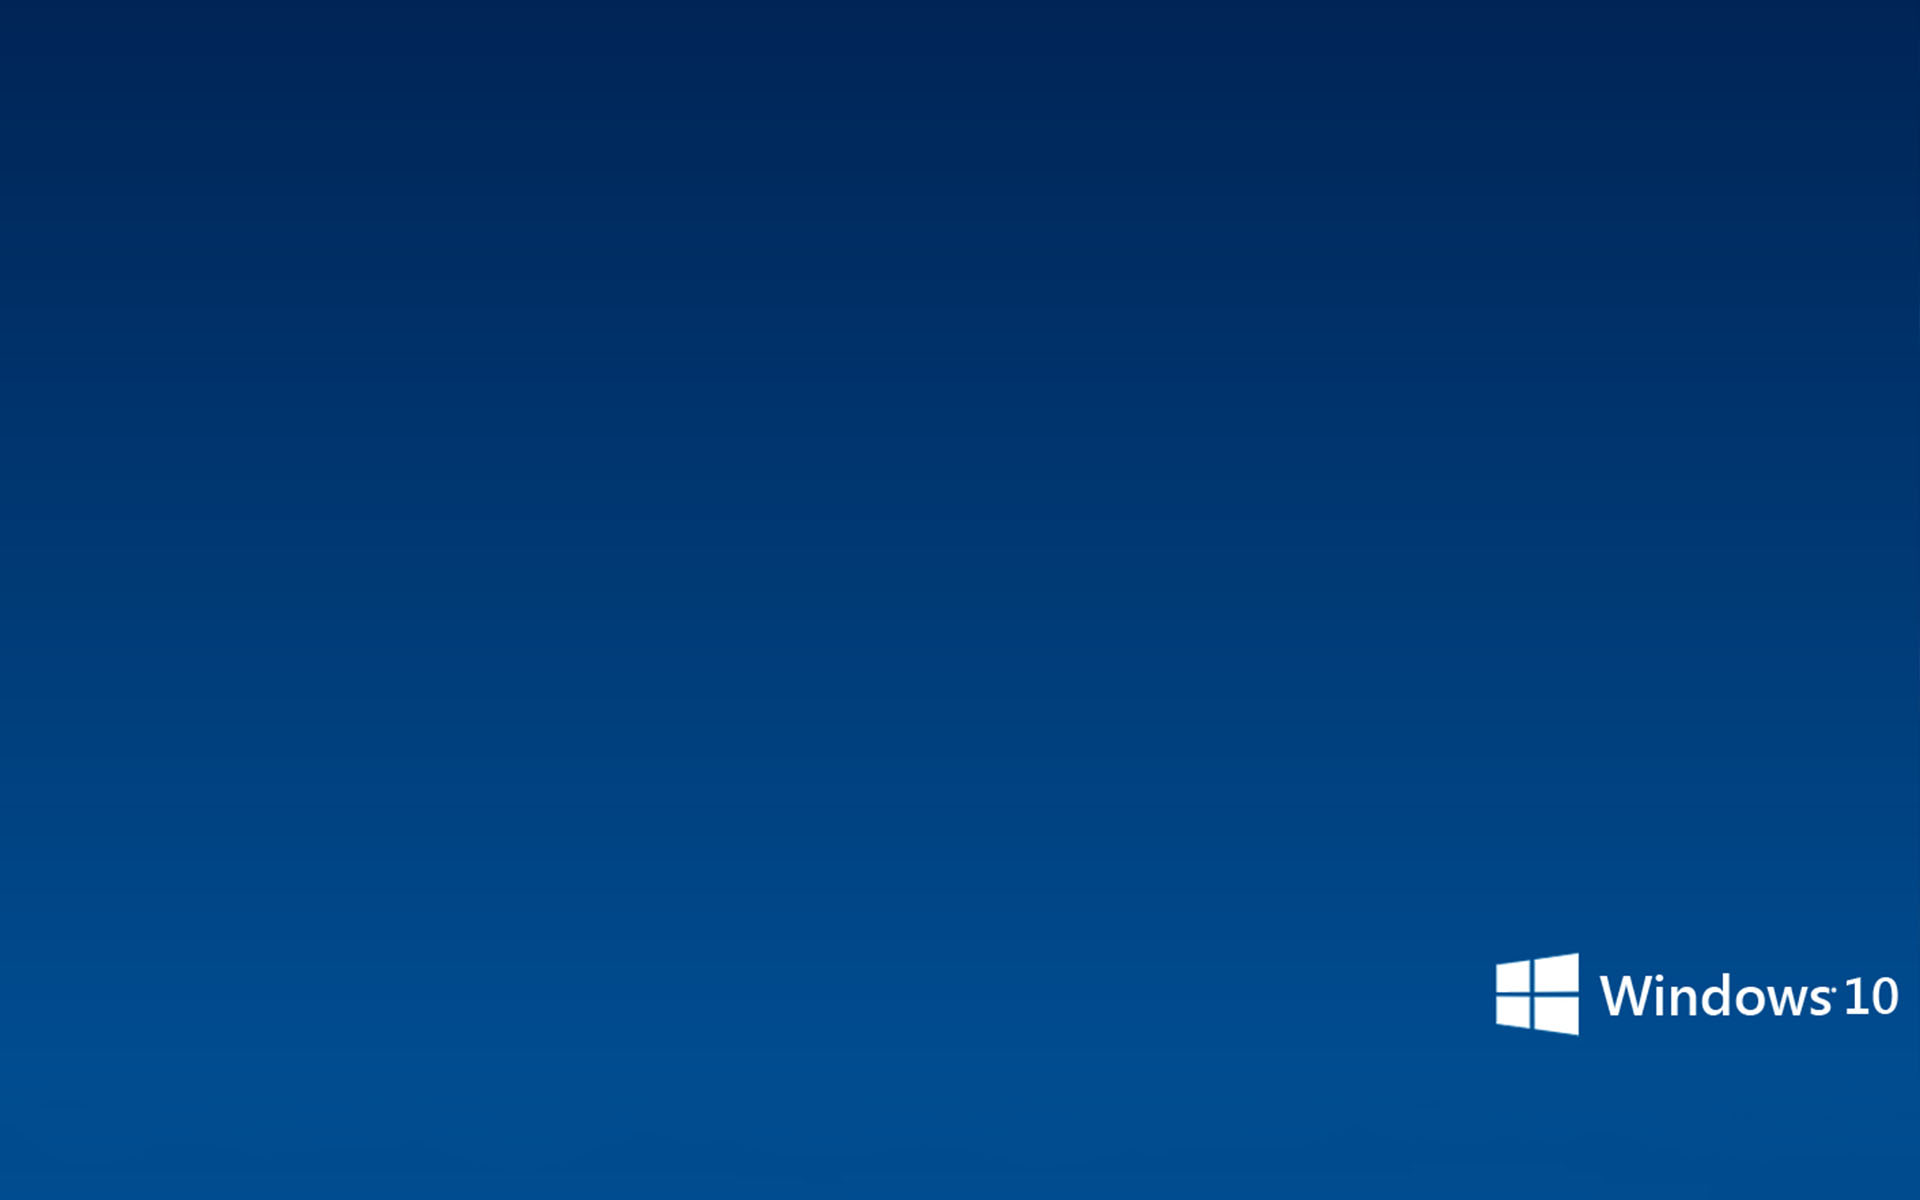 Free Download Simple Microsoft Windows 10 Wallpaper Wallpapers 1920x1200 For Your Desktop Mobile Tablet Explore 48 Microsoft Windows 10 Wallpaper Download Free Wallpaper Backgrounds Windows 10 Official Wallpapers Windows 10 Mobile Hd Wallpapers